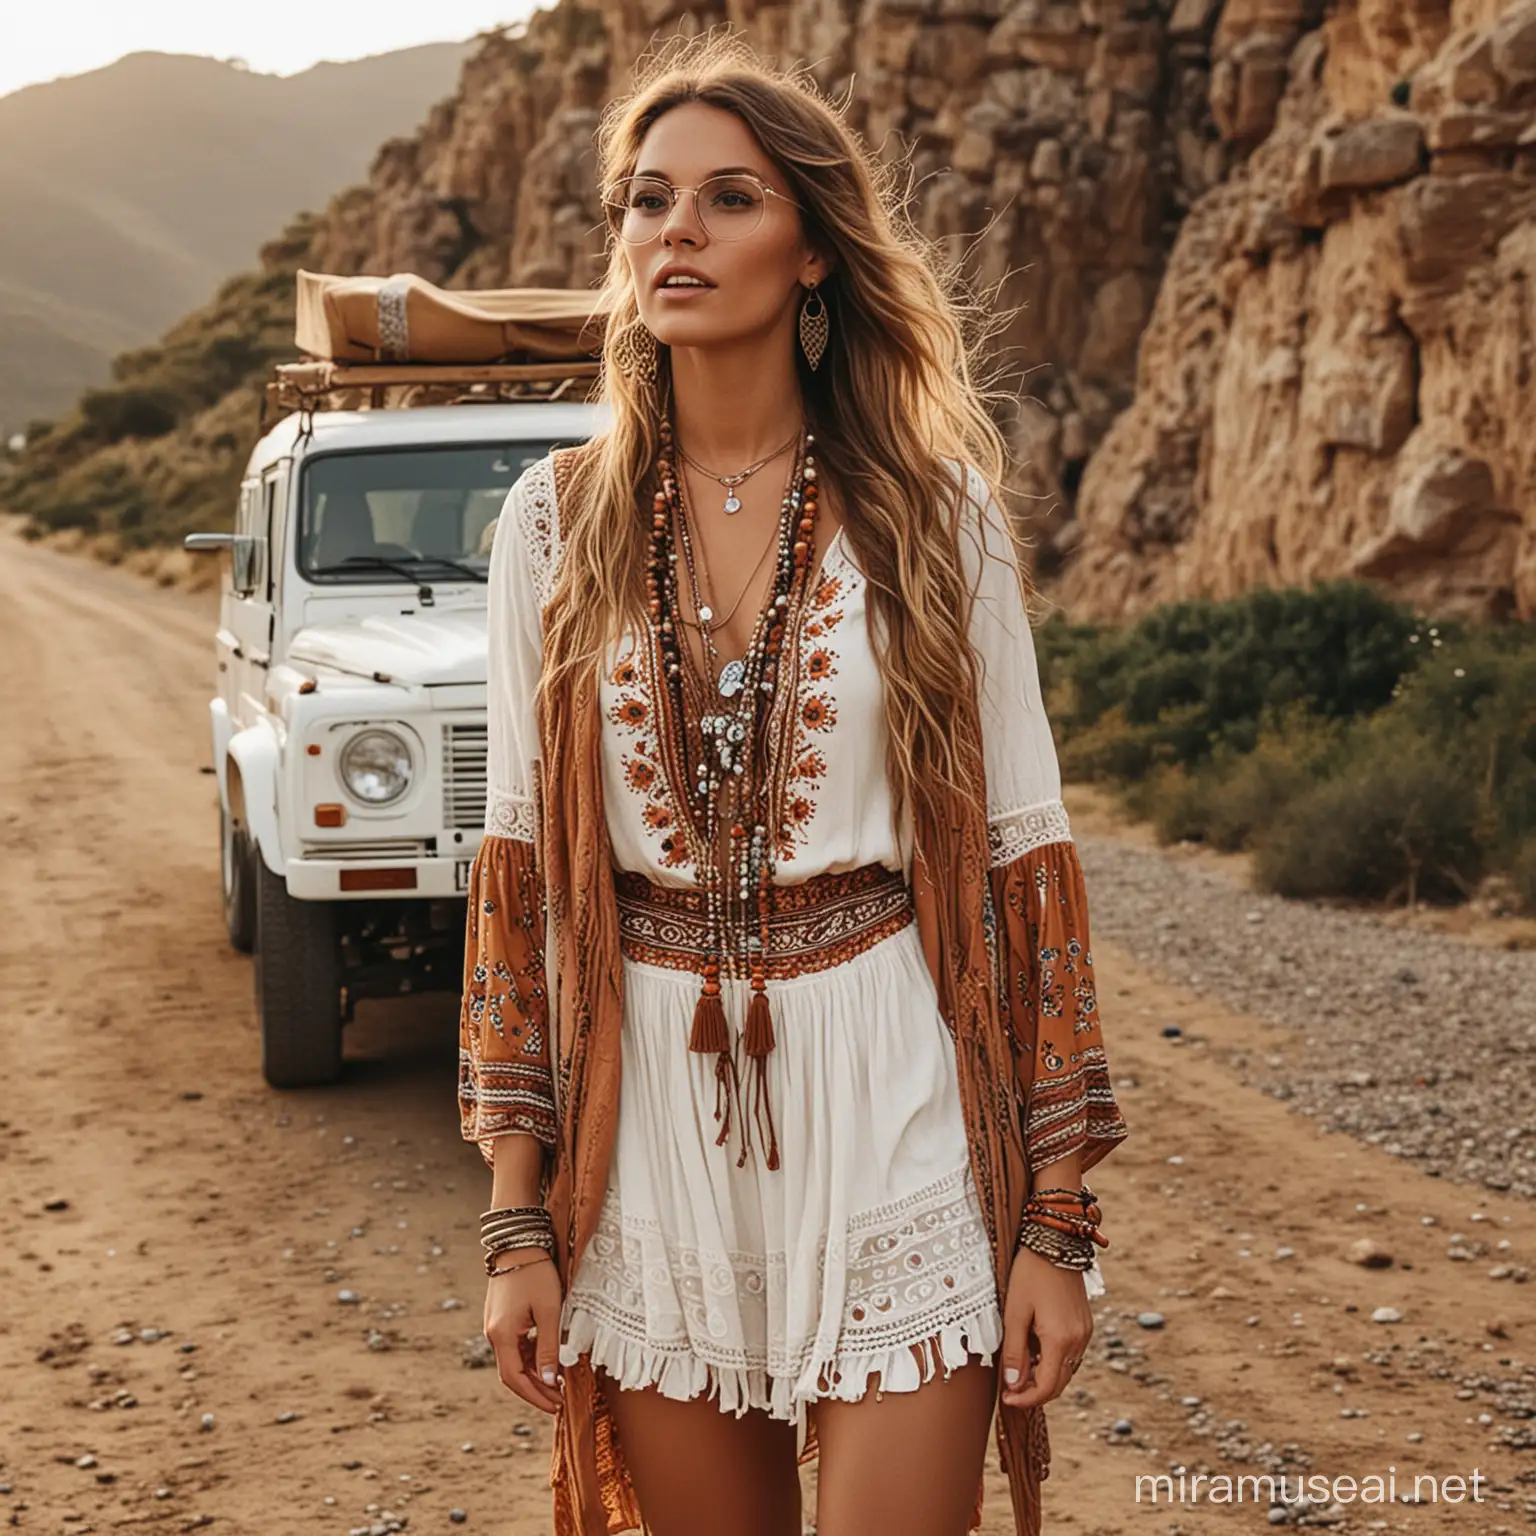 Fashionable Bohemian Woman Embracing Hippie Style Trends